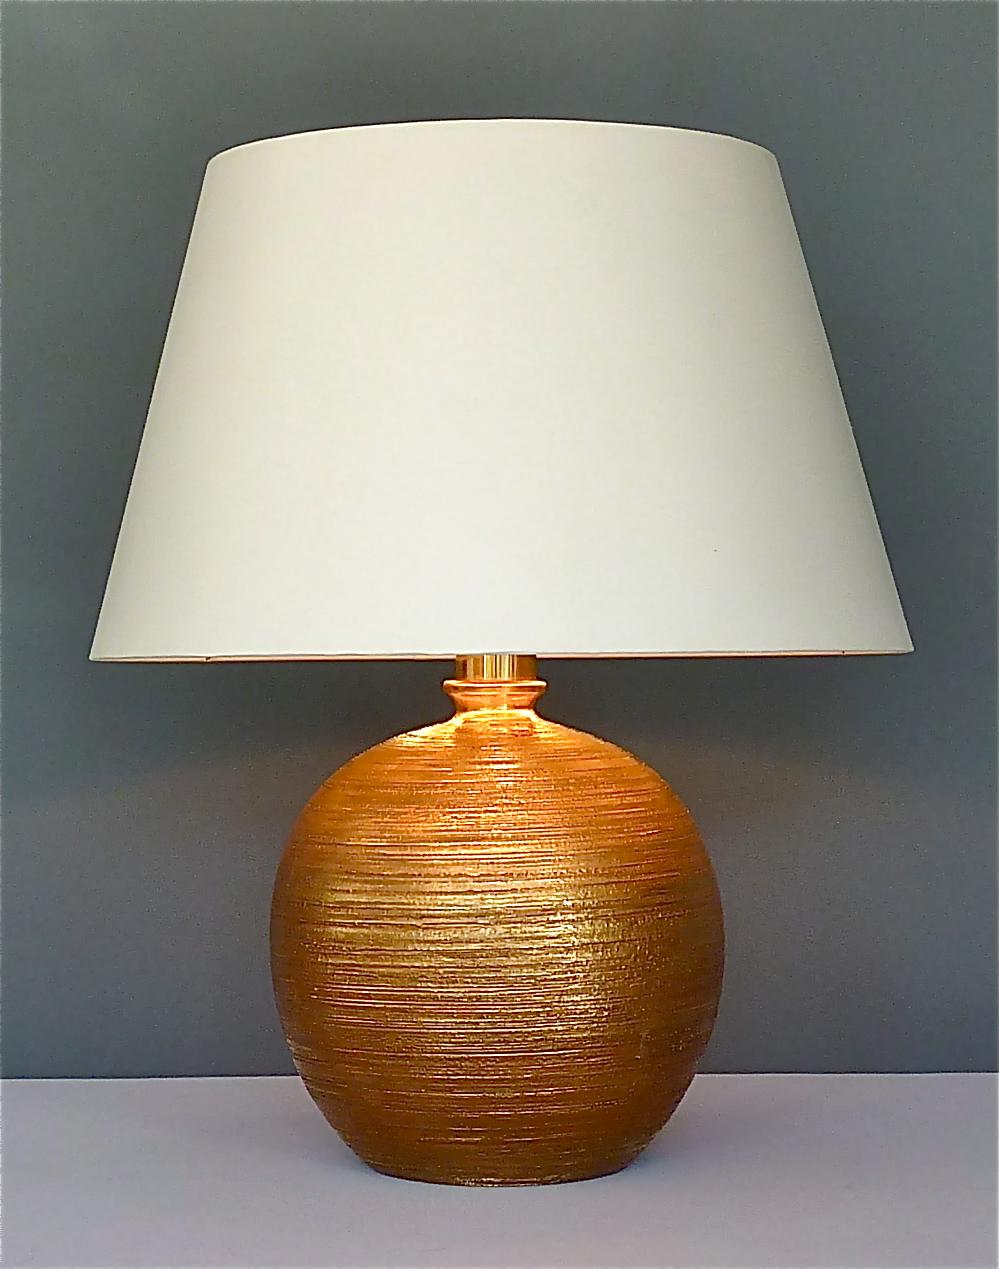 Large gold metallic glazed hand-incised ceramic table lamp by Aldo Londi, Bitossi for Bergboms Italy, Sweden around 1950s. Made in Italy for the Scandinavian market from a limited edition of 30 pieces this is no. 12, signed with paper label to